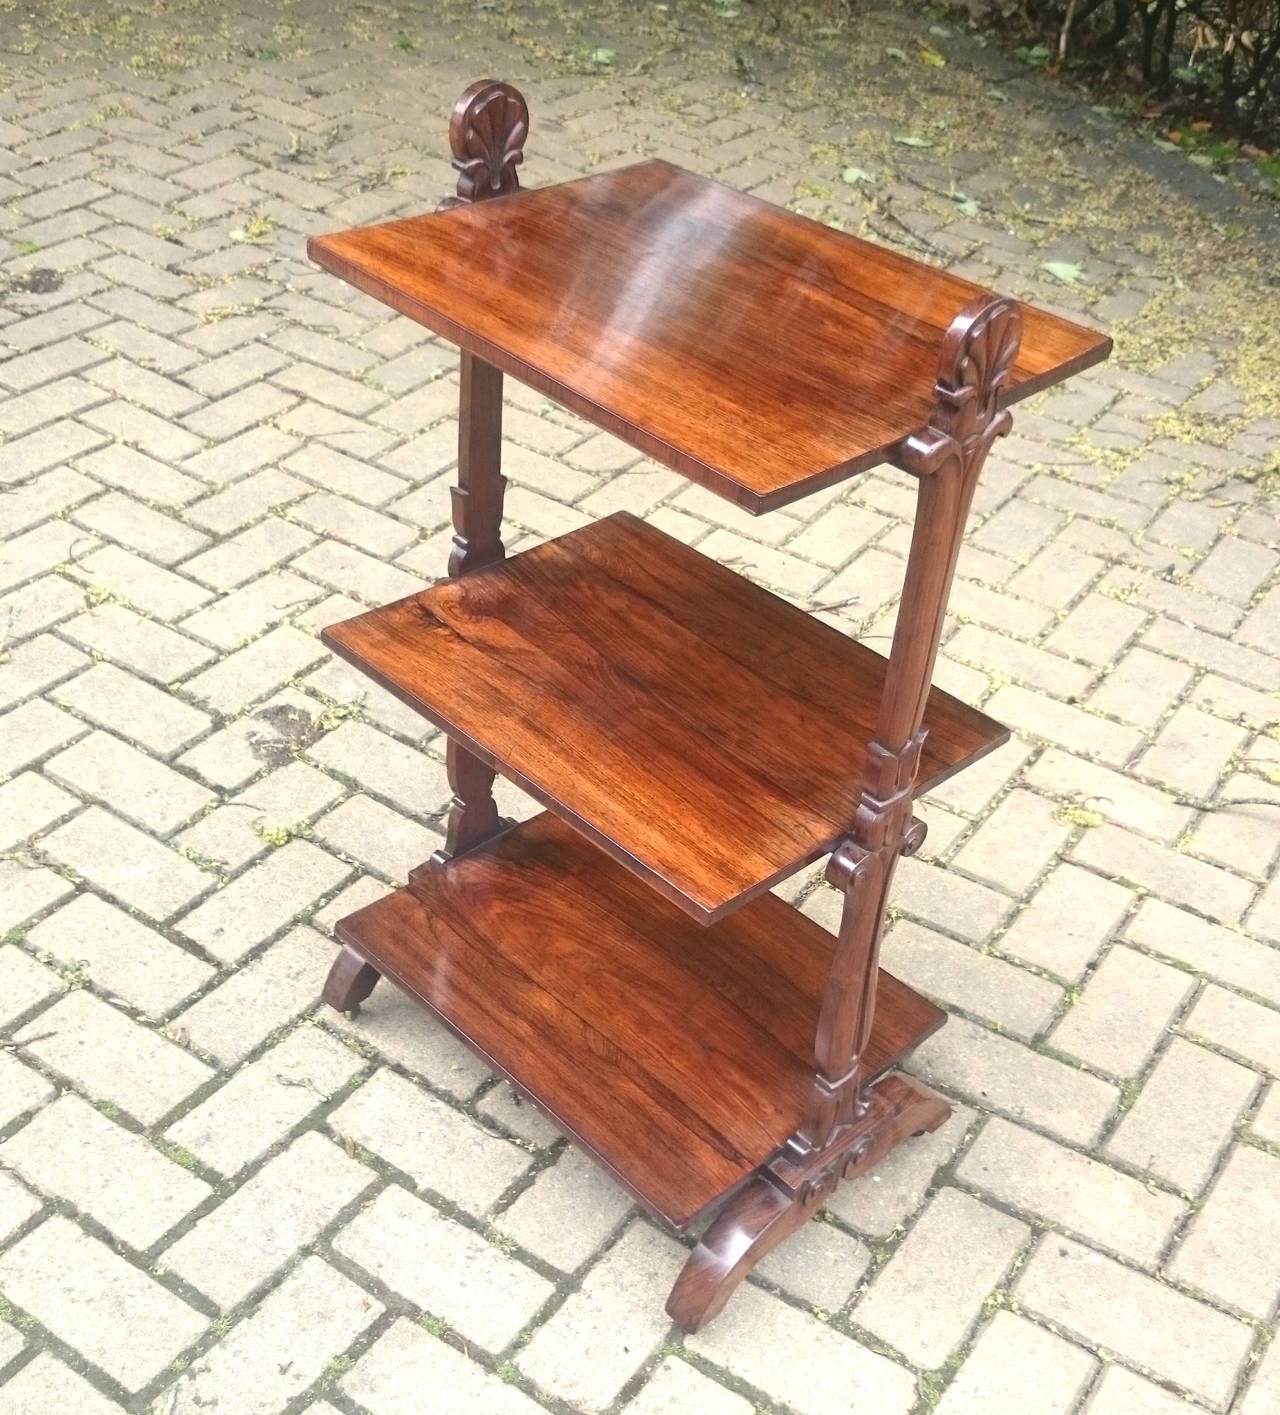 Lovely little antique whatnot, this very useful whatnot is made of wonderful rosewood and is a great small scale, perfect to use next to sofa as a wine table, with shelves for magasines, books, gin and tonic, remote controls etc. 

English circa